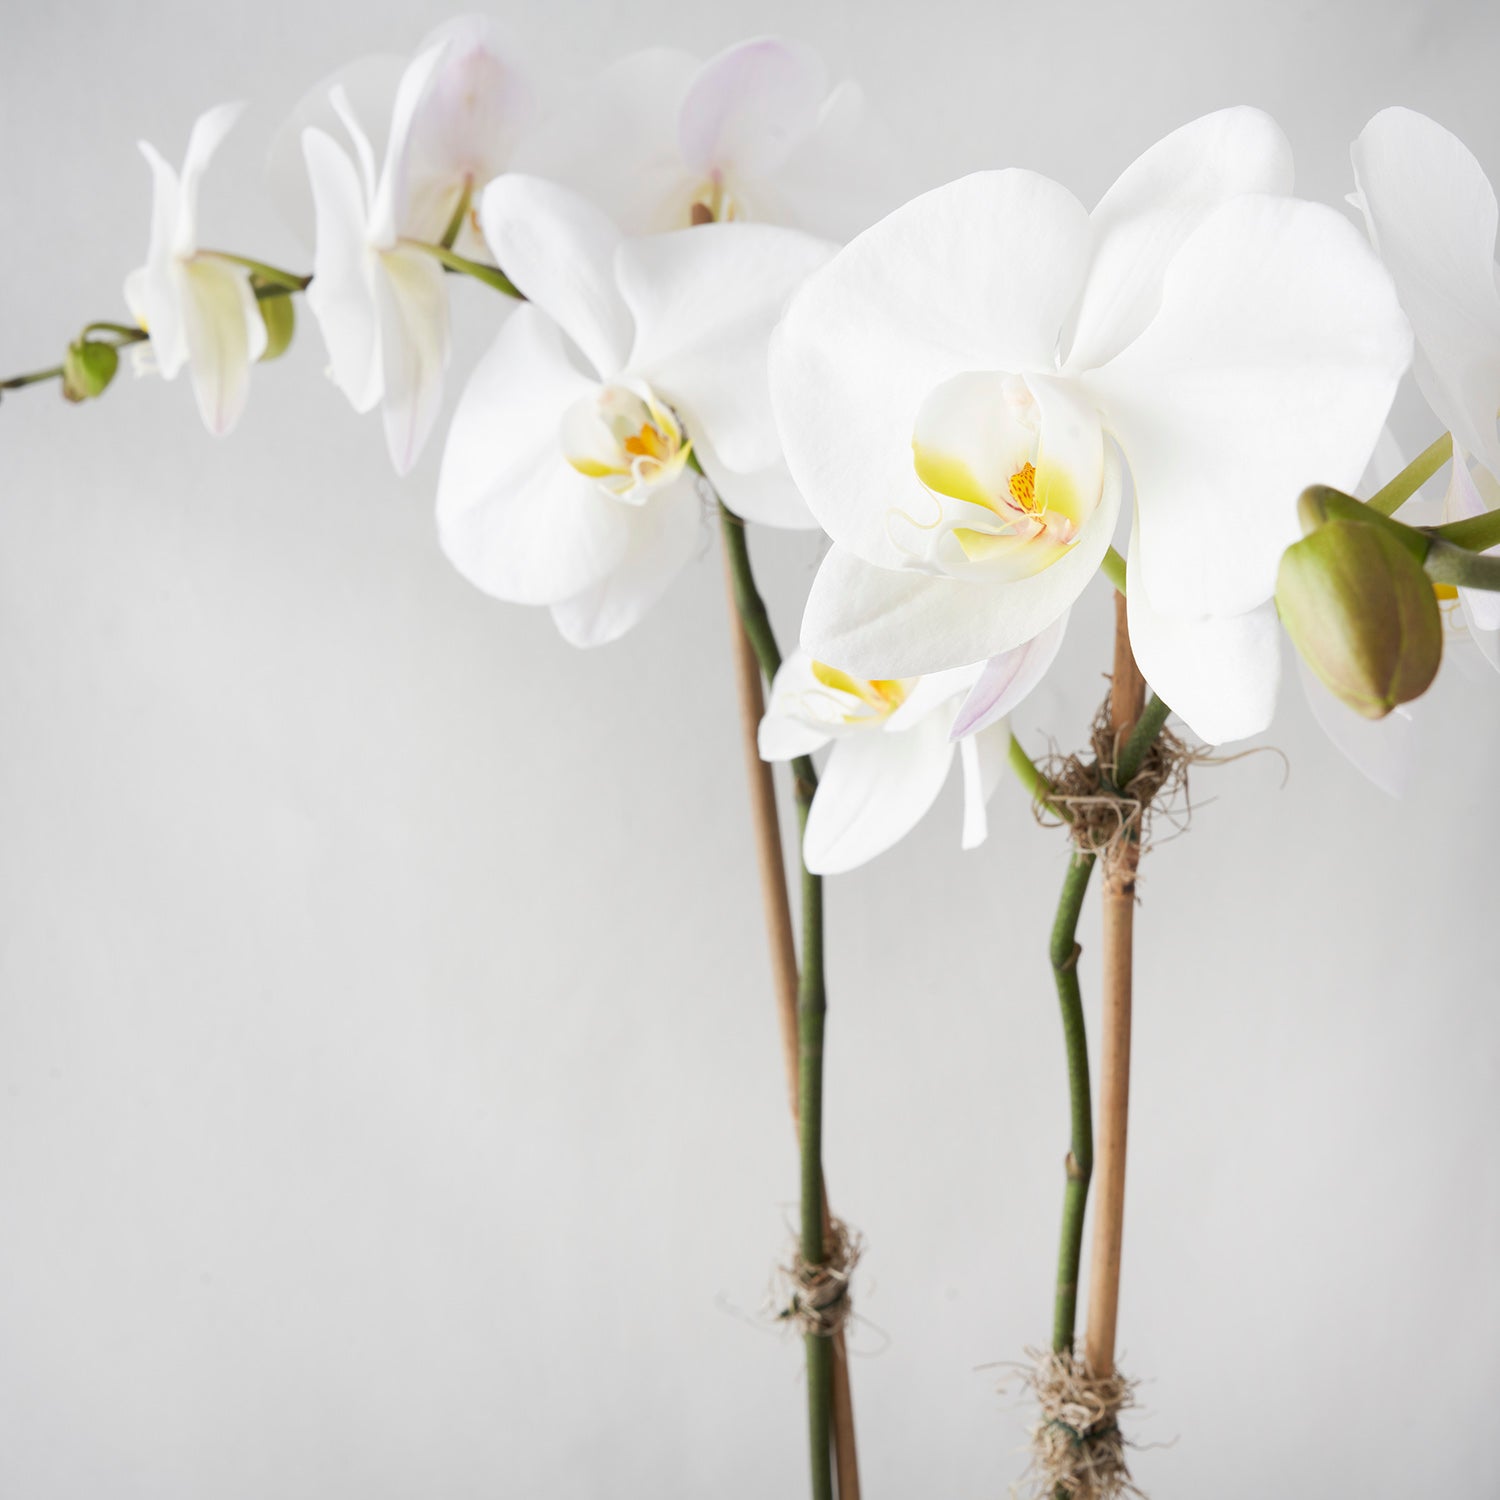 Closeup of two stems of white phalaenopsis orchid flowerson white bacground.